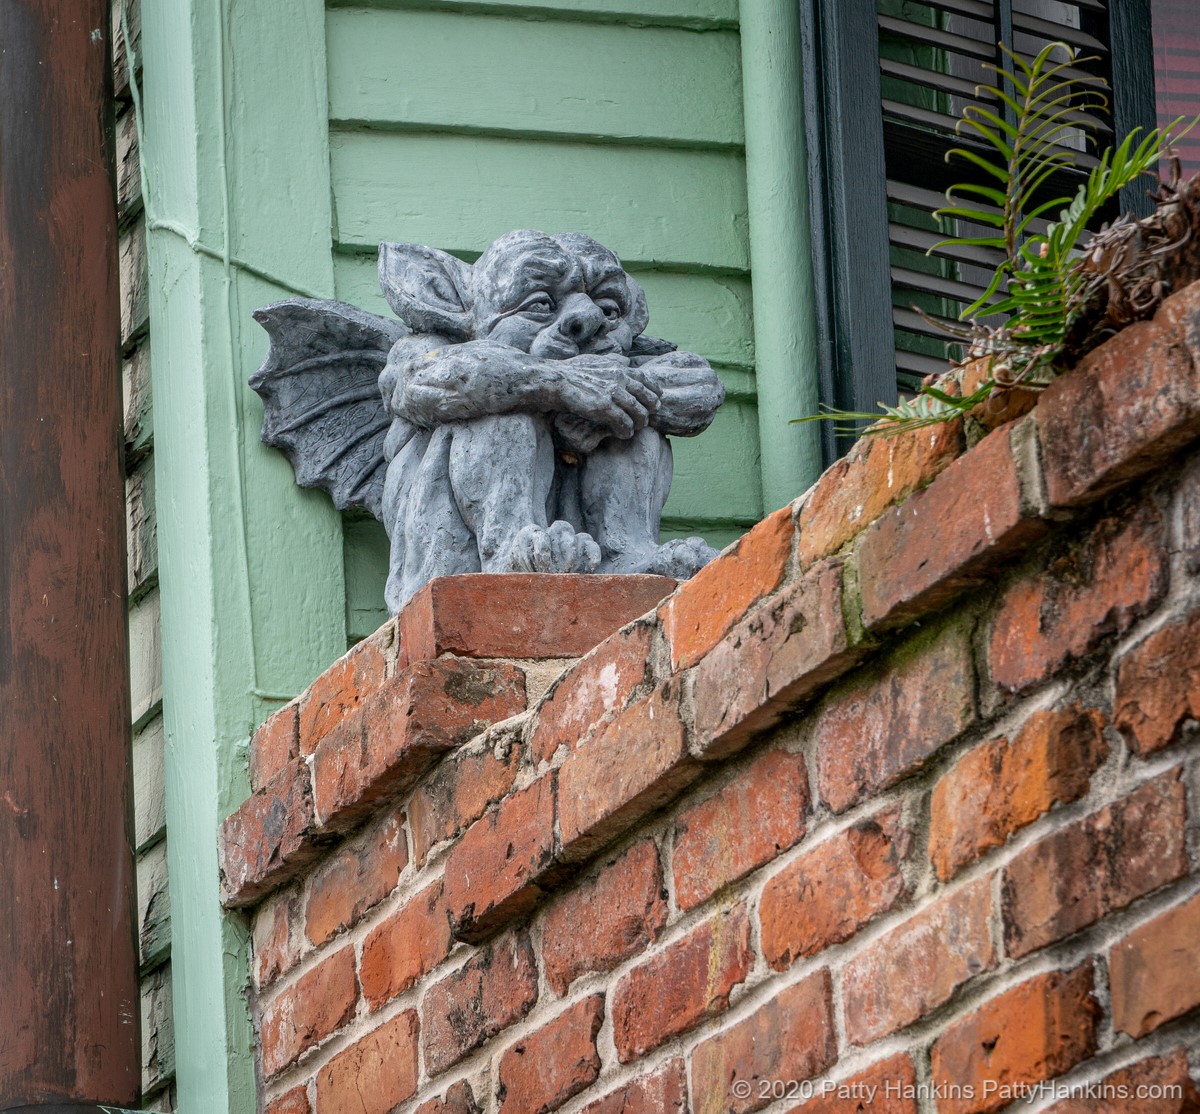 In the French Quarter, New Orleans © 2020 Patty Hankins